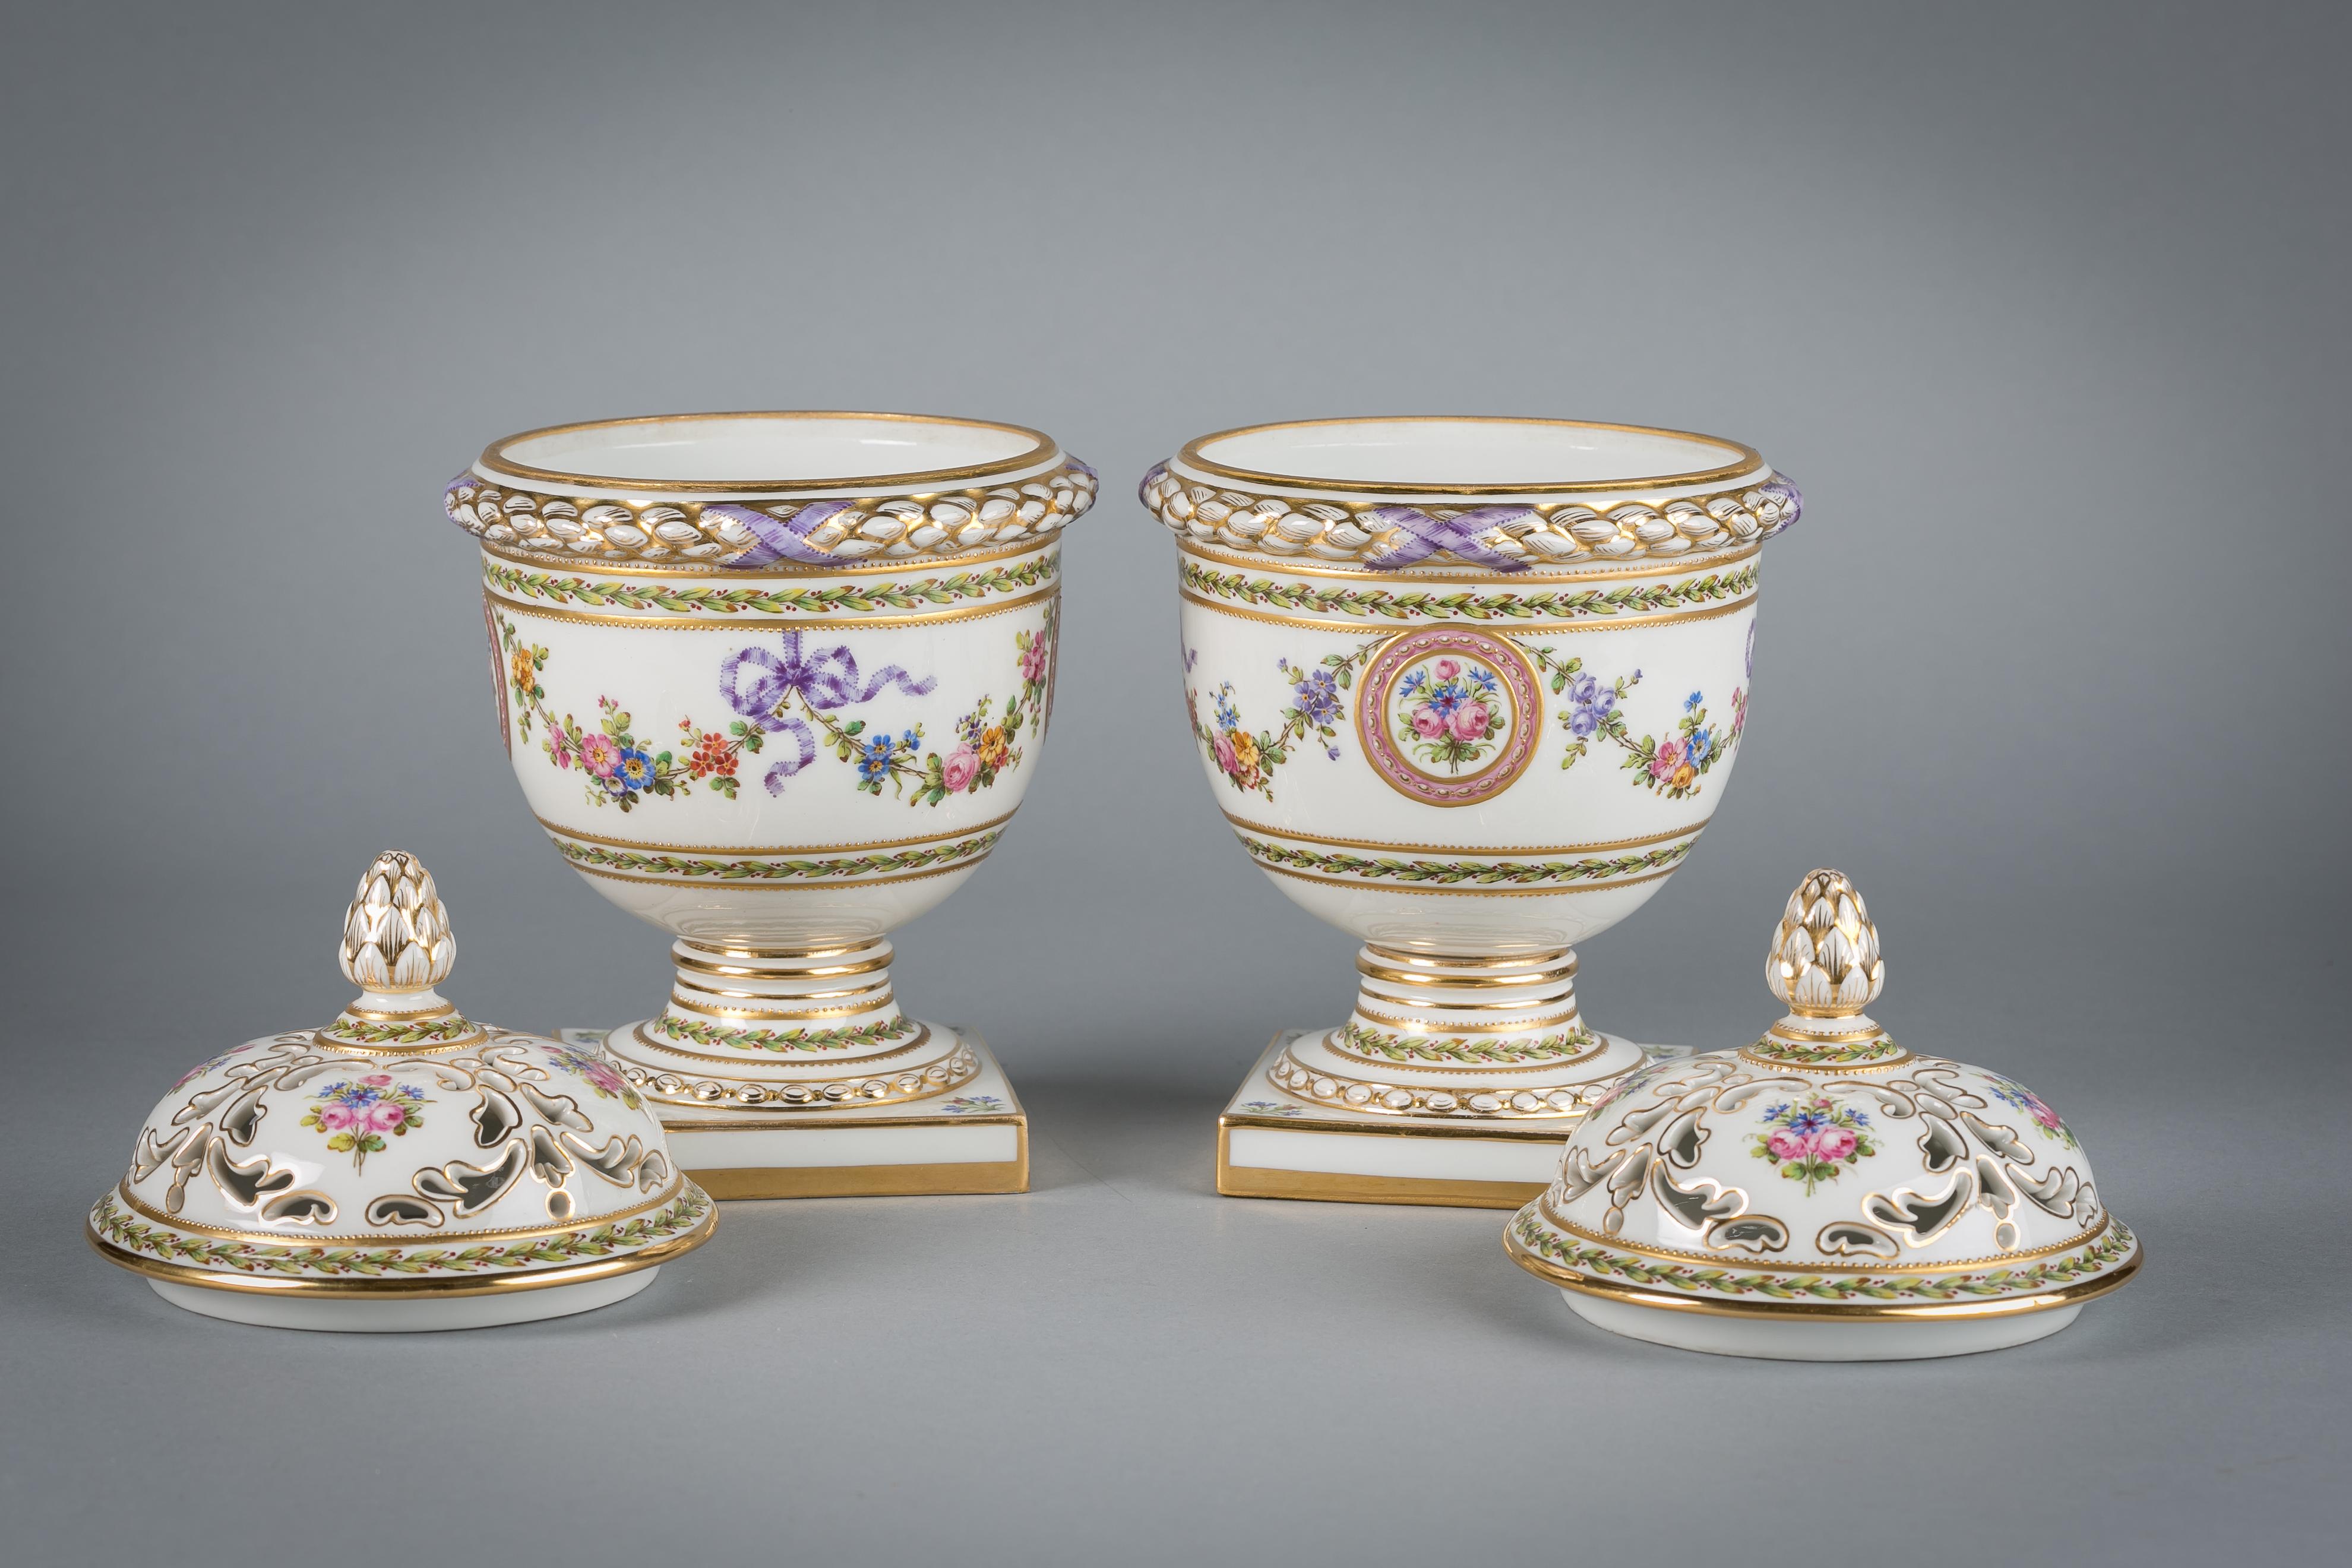 Pair of French porcelain covered potpourri covered jars, circa 1890.